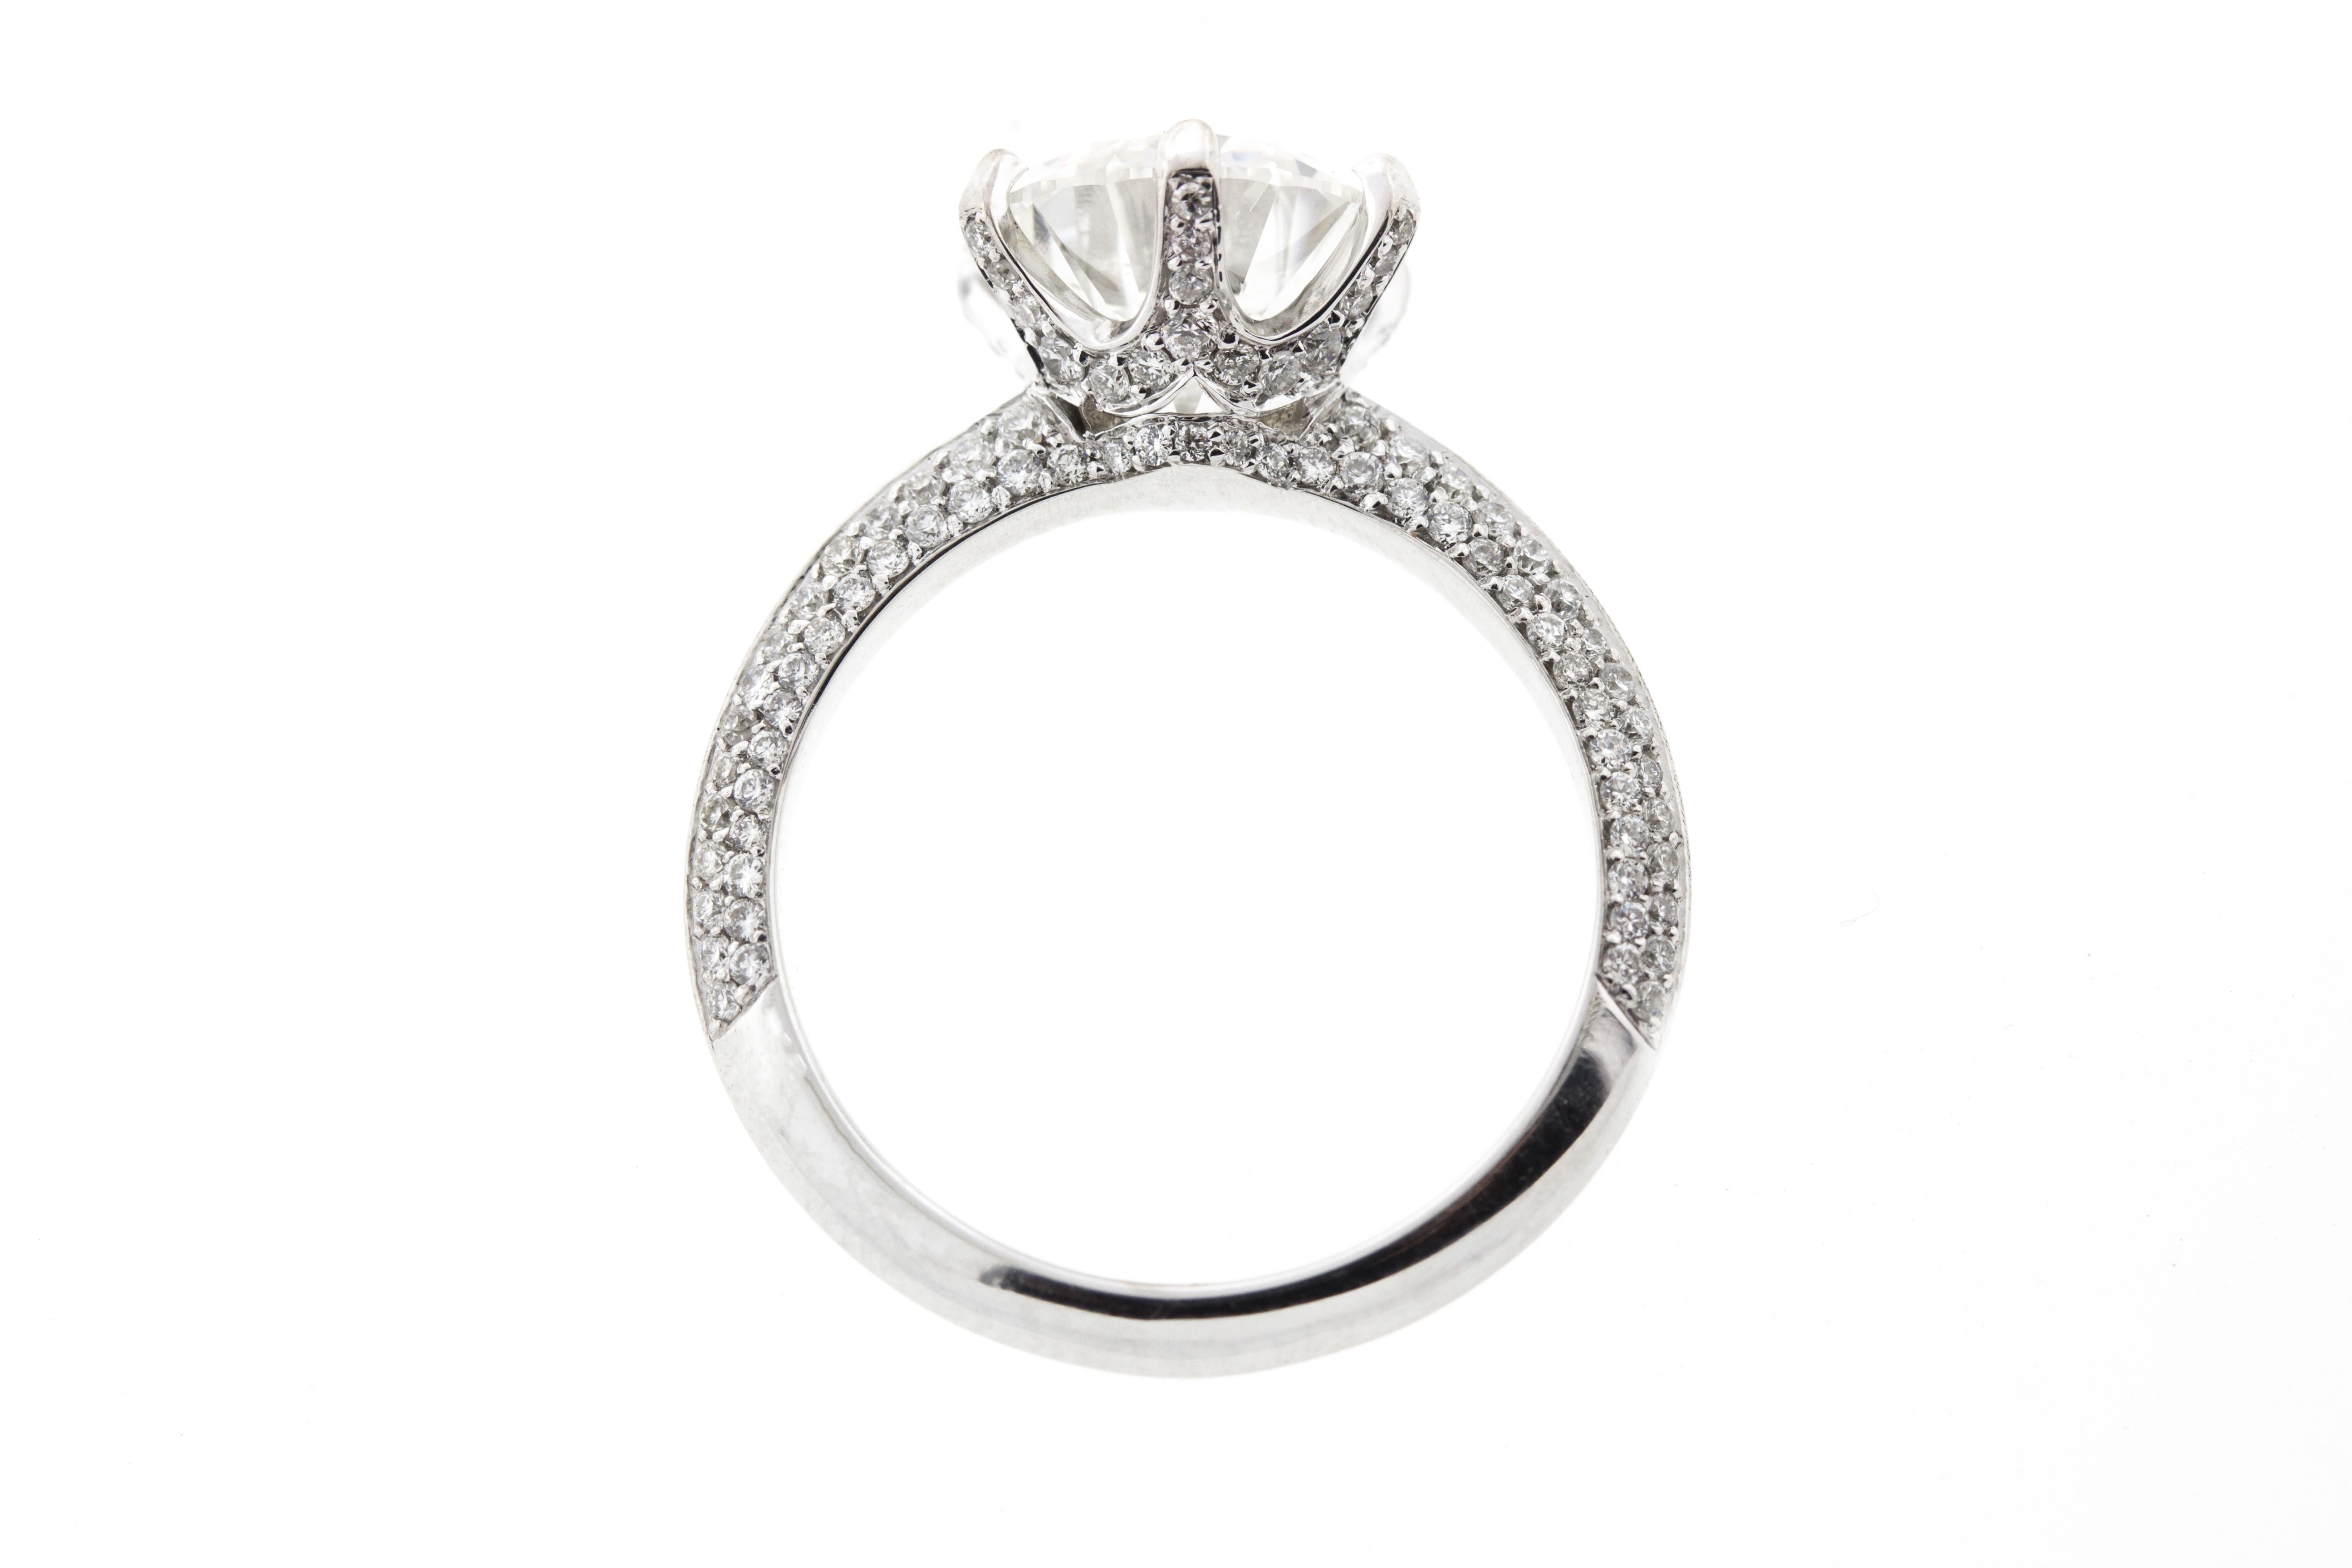 This six prong diamond engagement ring features micropave on three sides of the band, creating a continuous, crushed ice look. A round center stone is cradled by six prongs and boasts its own micropave underneath the basket for a truly unique look.